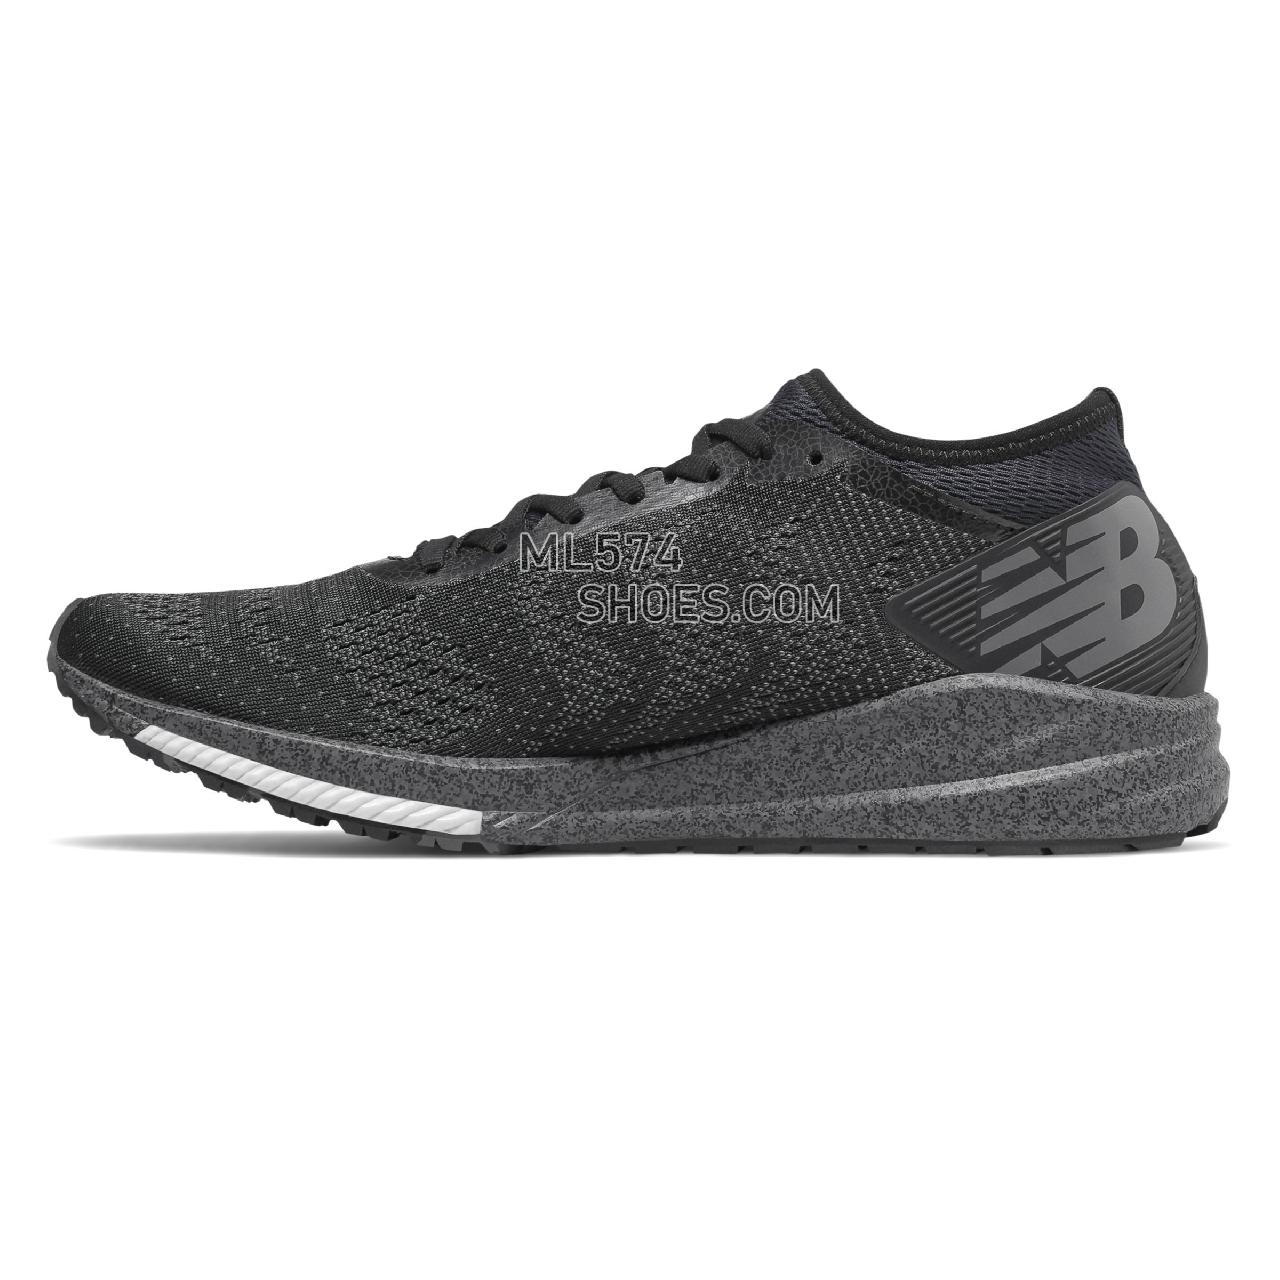 New Balance FuelCell Impulse - Men's  - Running Black with Copper - MFCIMX